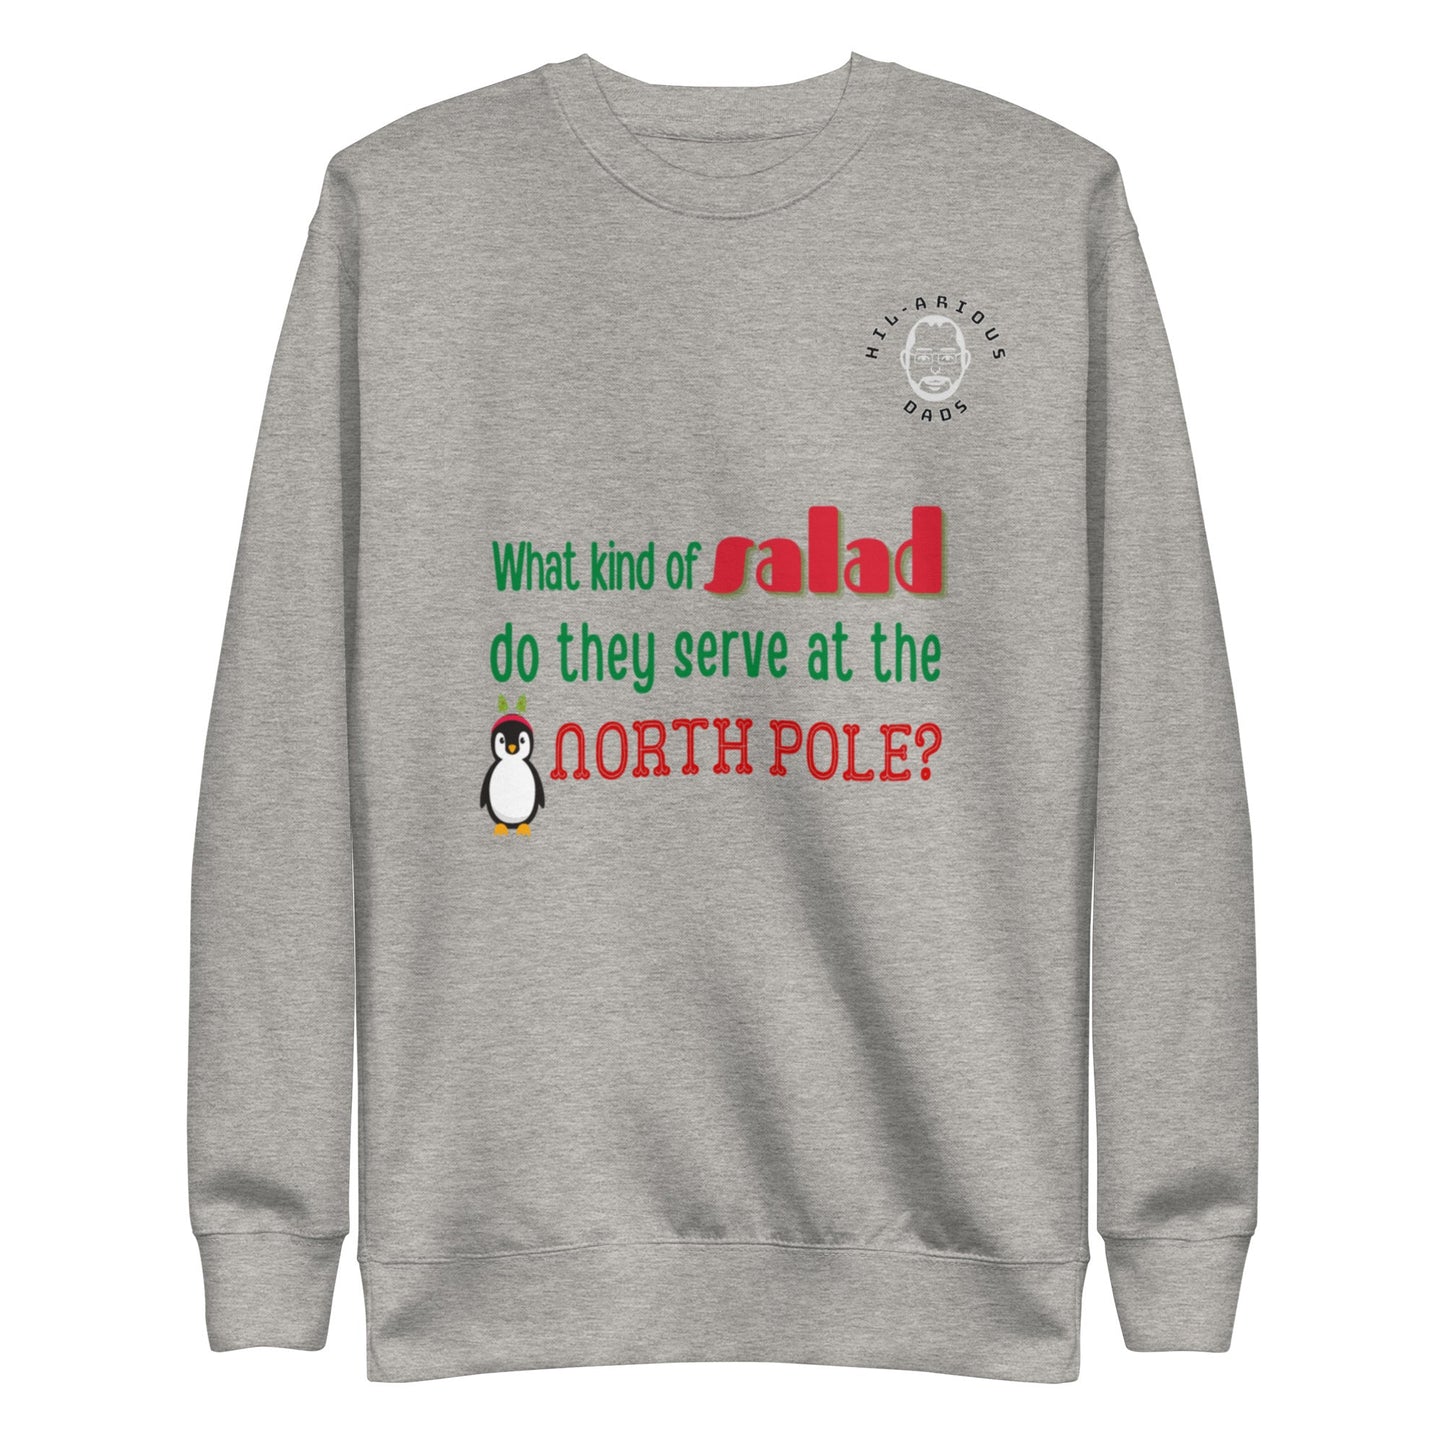 What kind of salad do they serve at the North Pole?-Sweatshirt - Hil-arious Dads